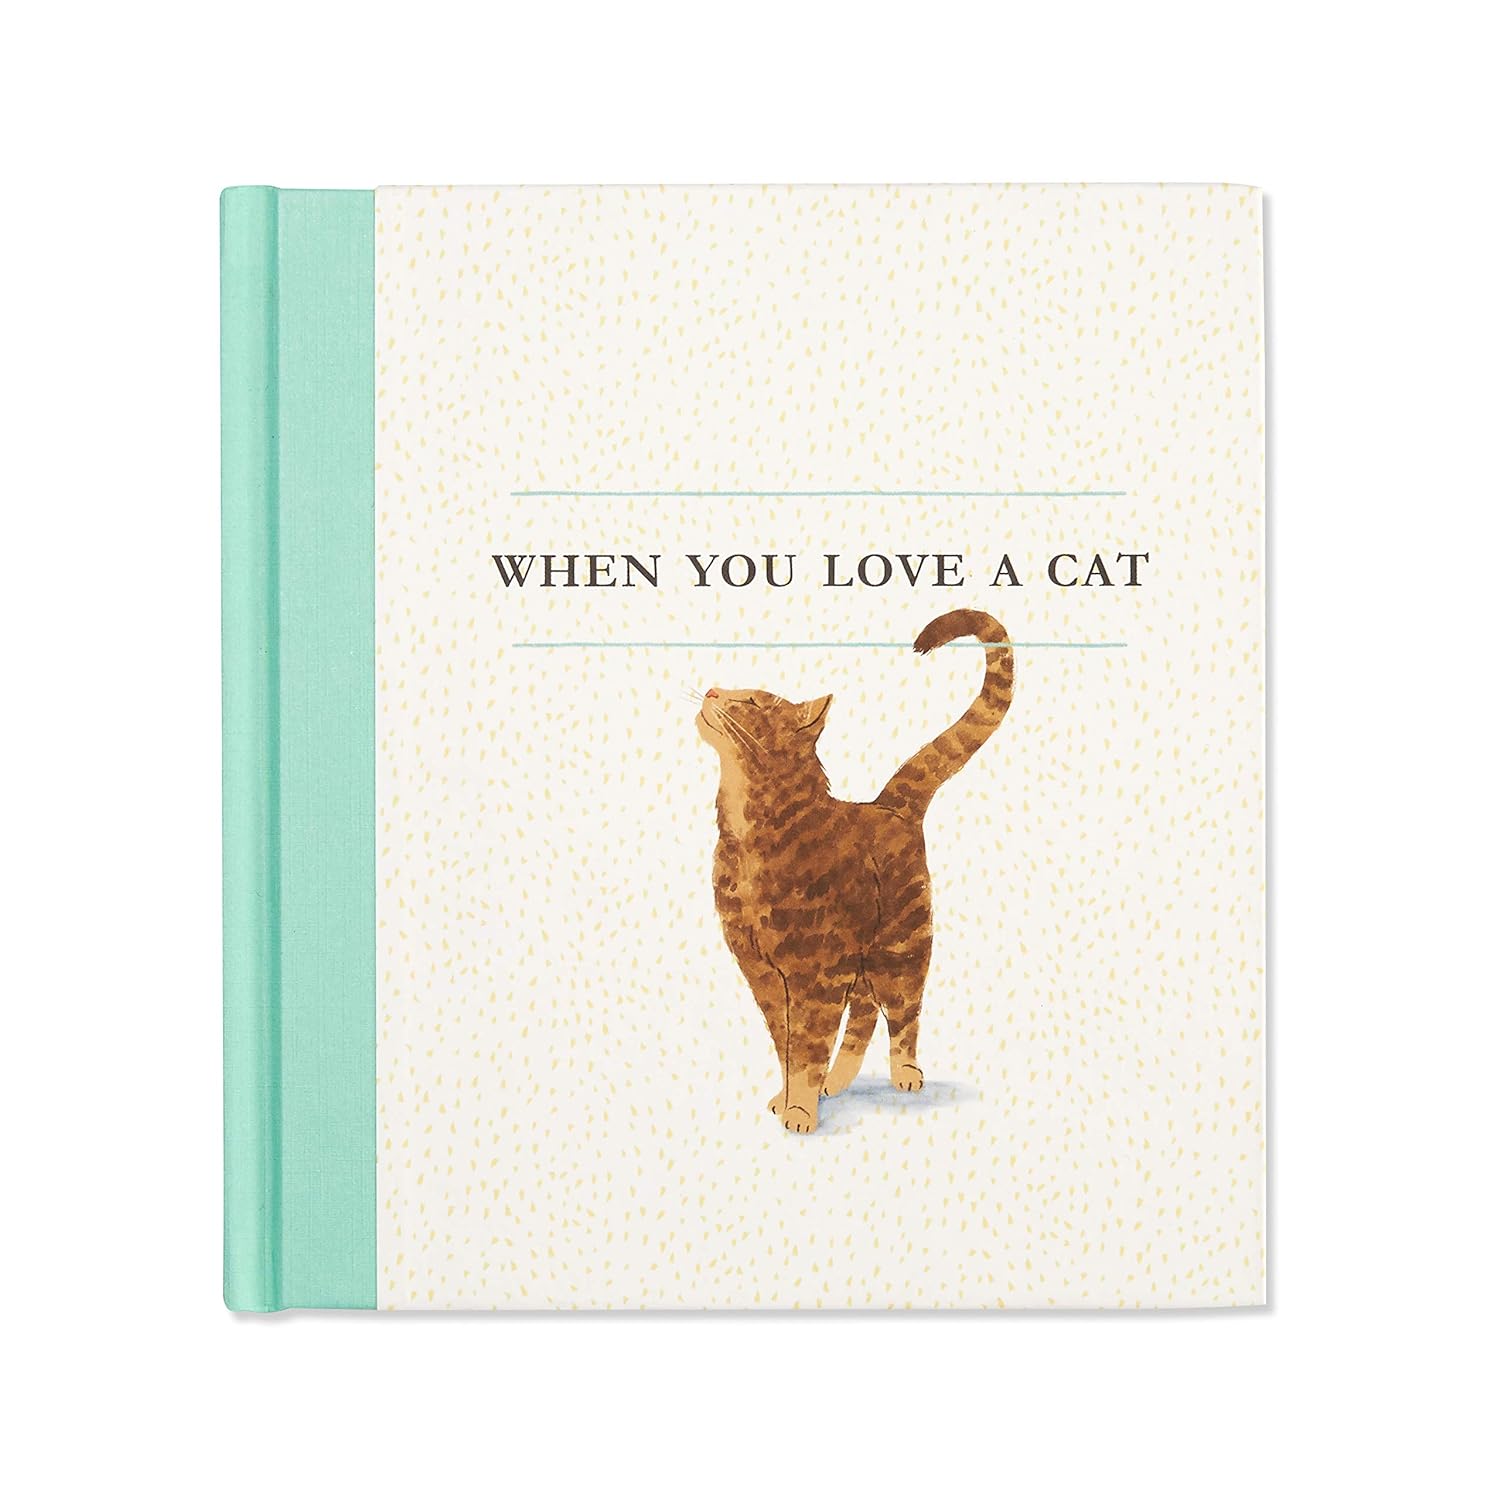 When You Love a Cat — A gift book for cat owners and cat lovers everywhere.